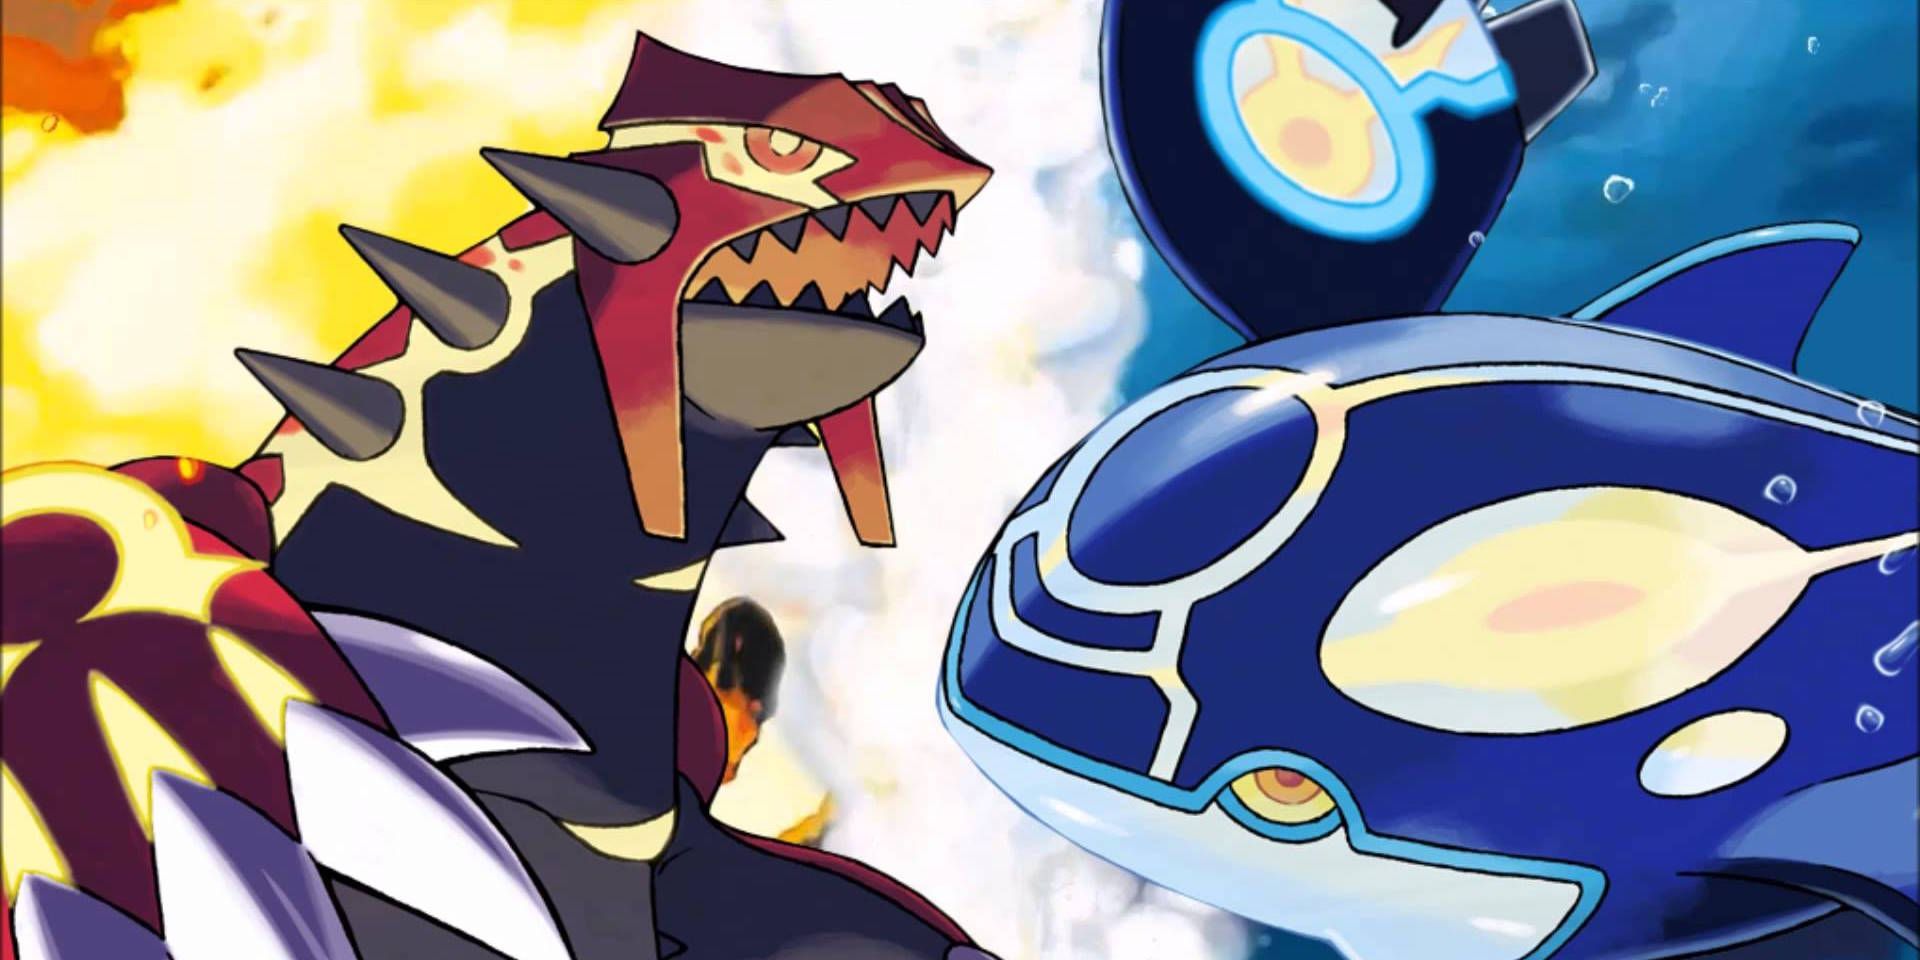 15 Most Powerful Pokémon Of All Time